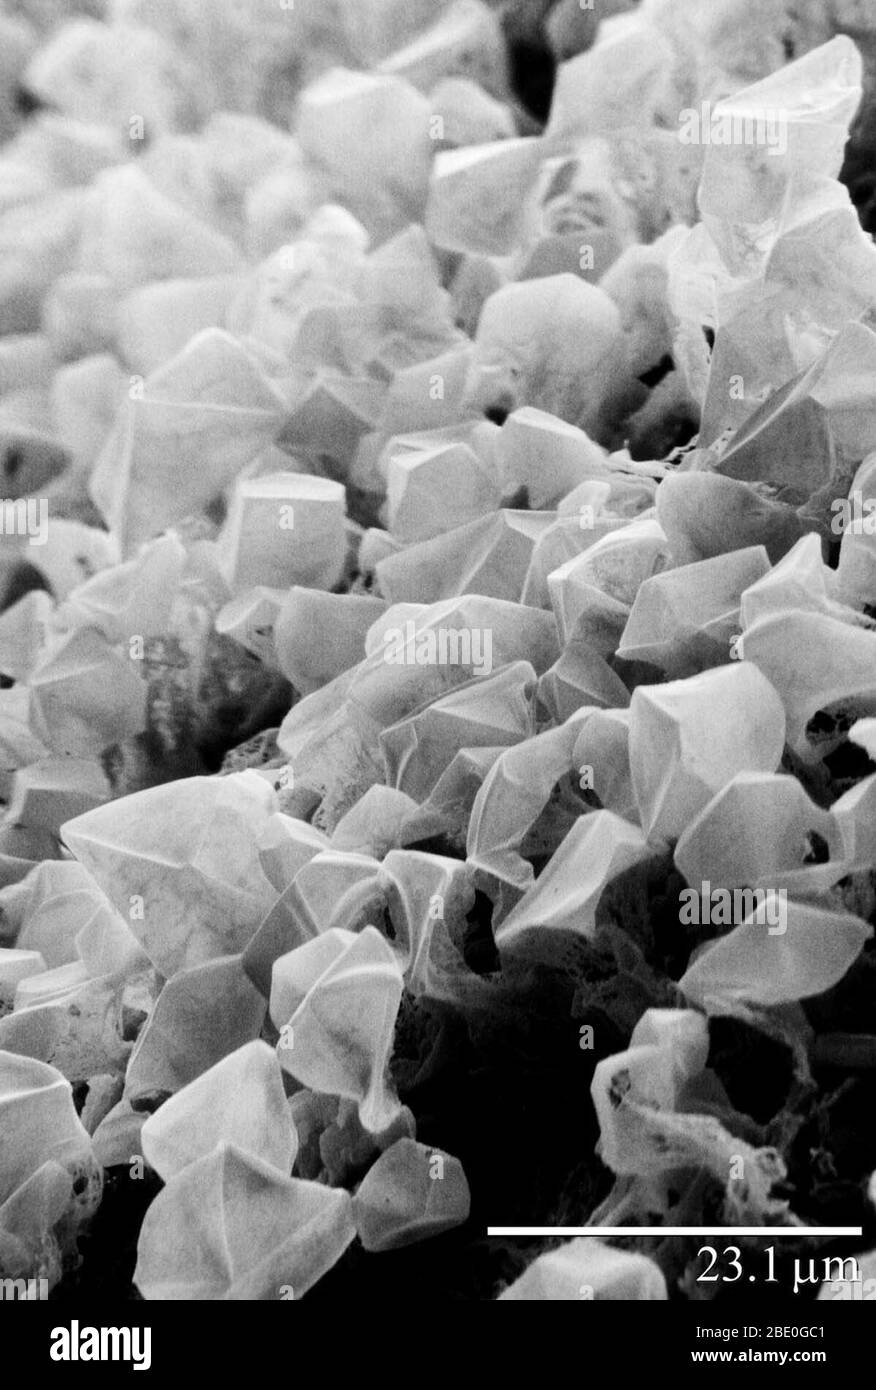 Carbon dioxide (CO2) ice/frost on Mars. Image was obtained using a Low Temperature Scanning Electron Microscope (LT-SEM). Stock Photo